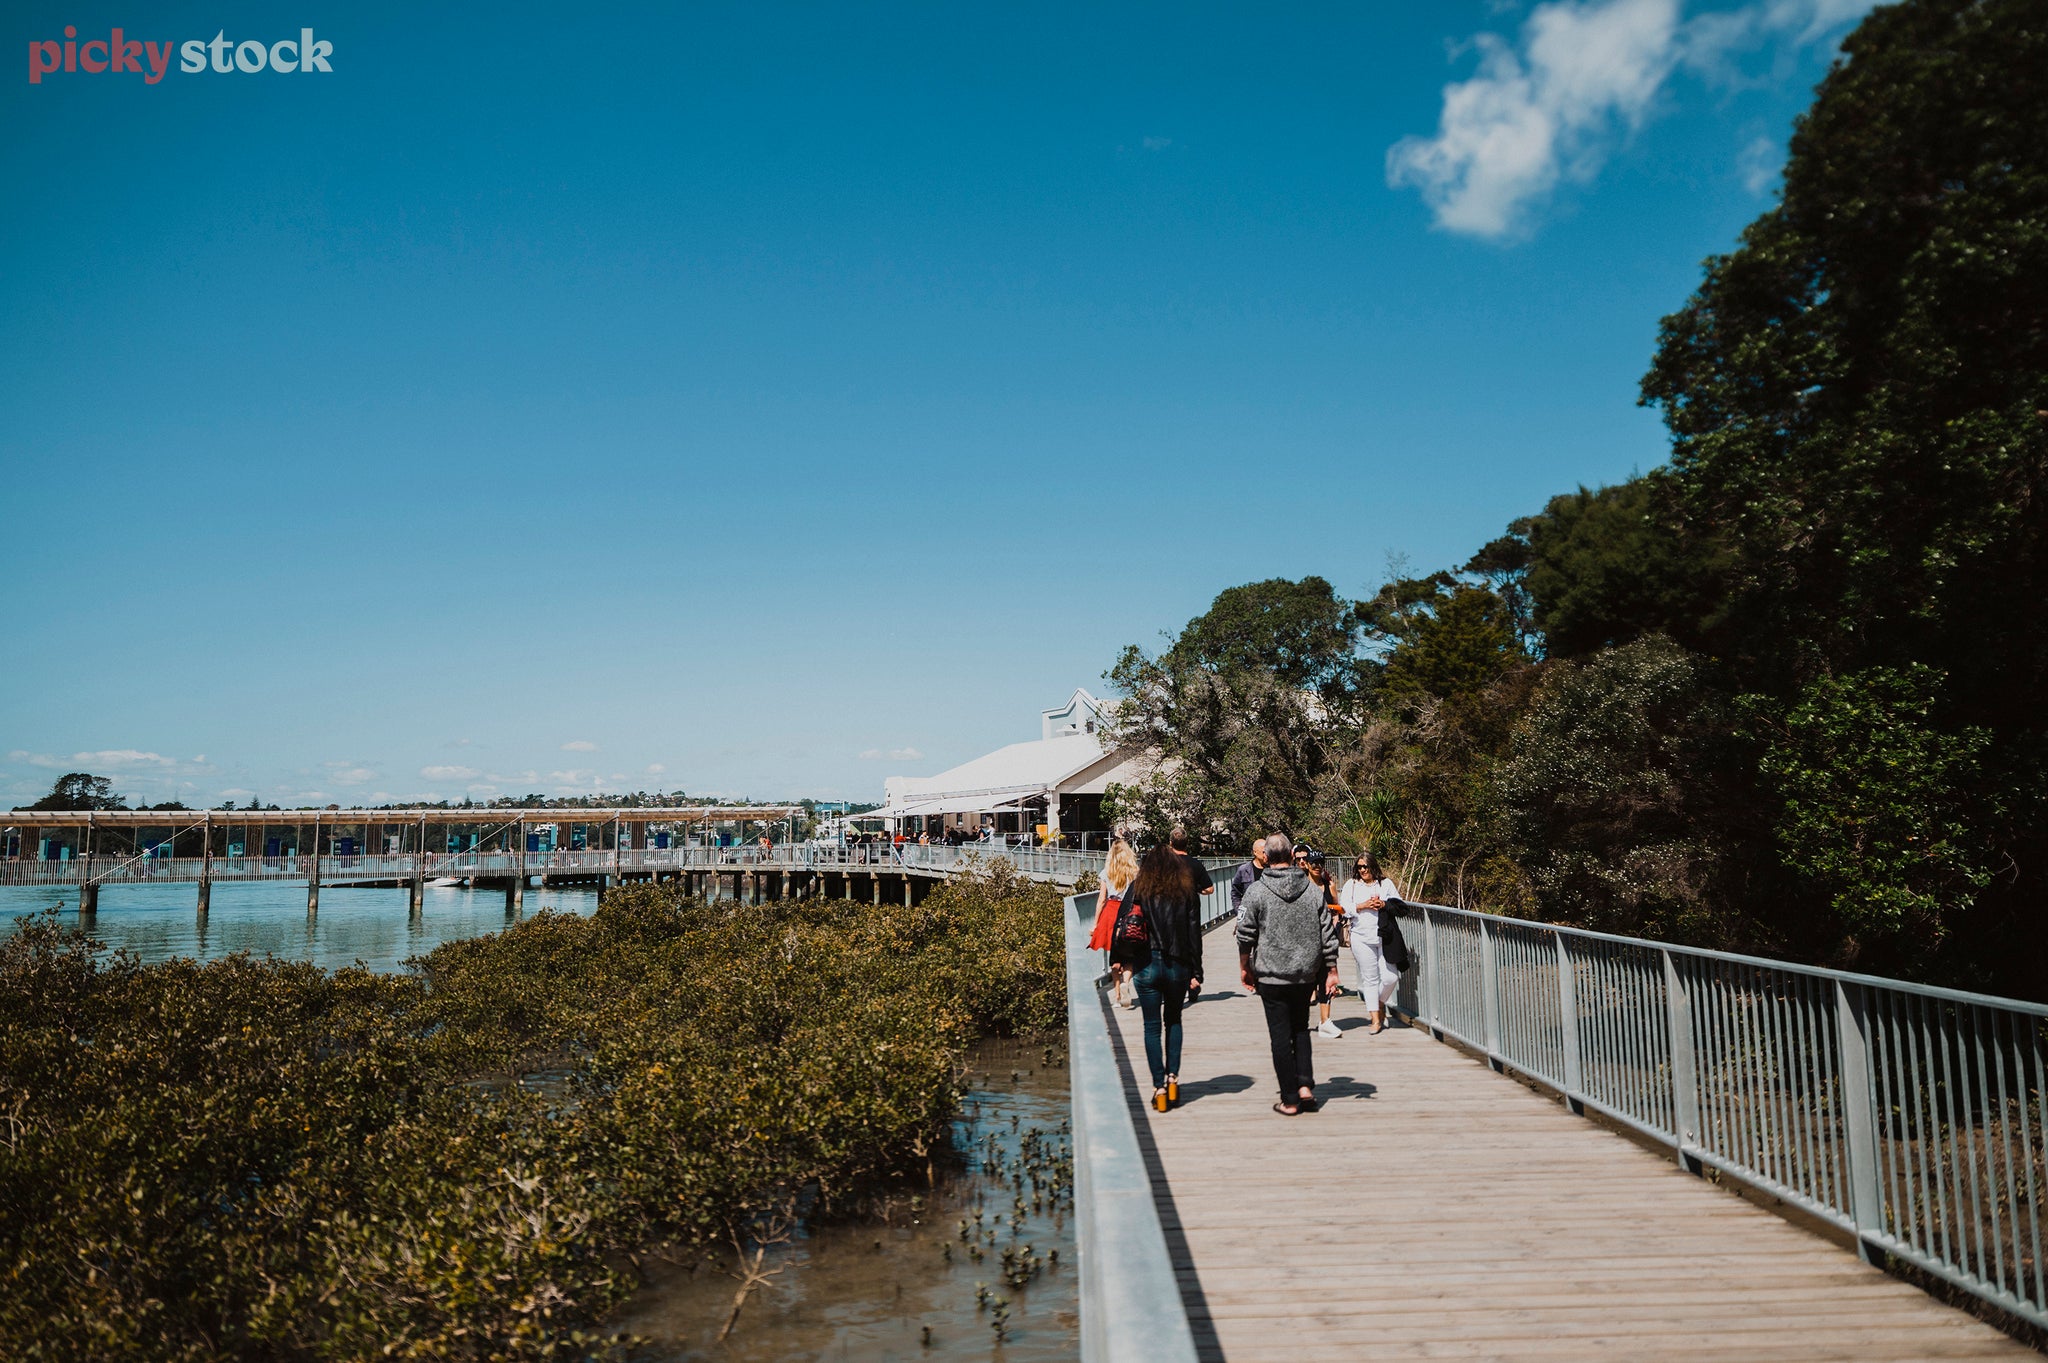 On a blue sky day, people walk on a shared path built above mangroves and an esturary to a ferry jetty.